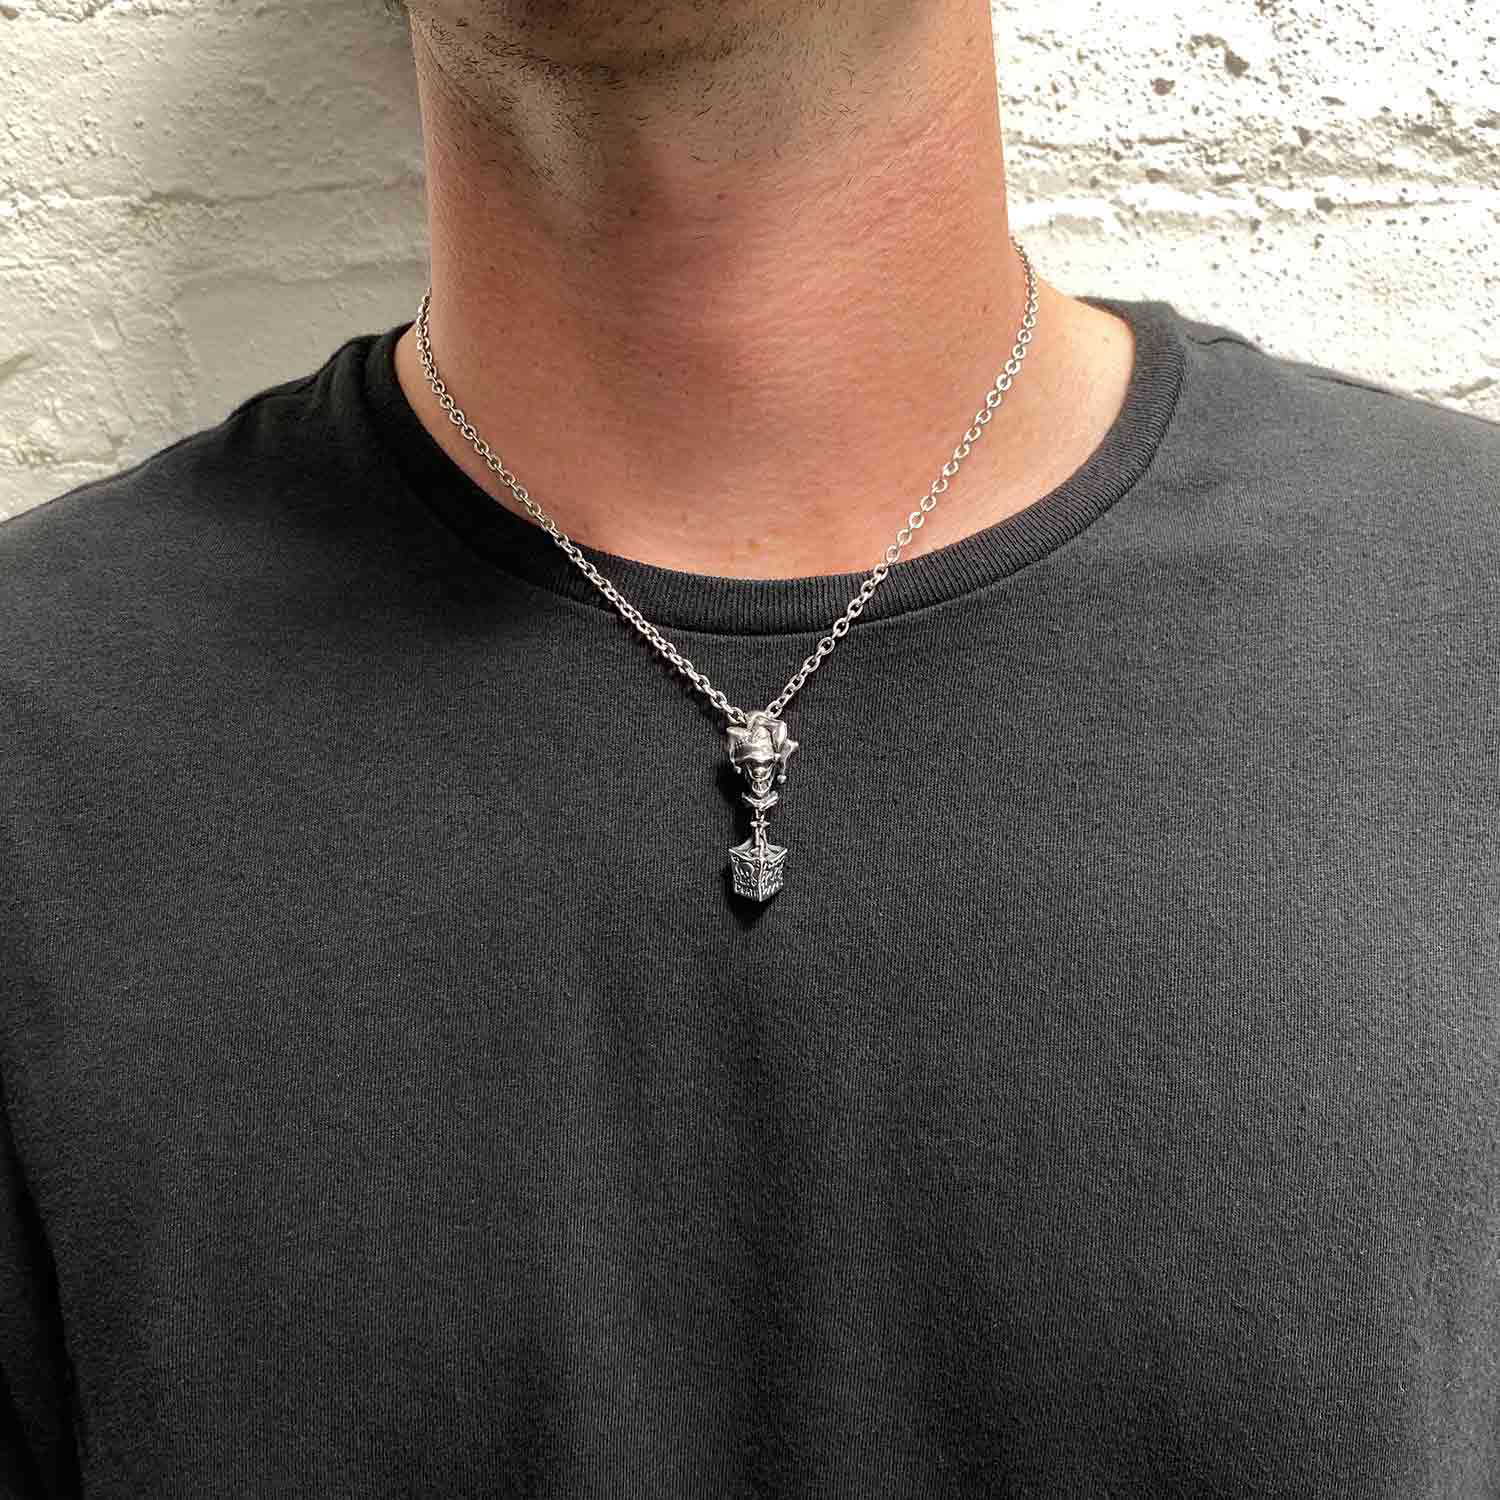 Personal Fears Jack In The Box Pendant on Neck Stainless Steel Jewelry